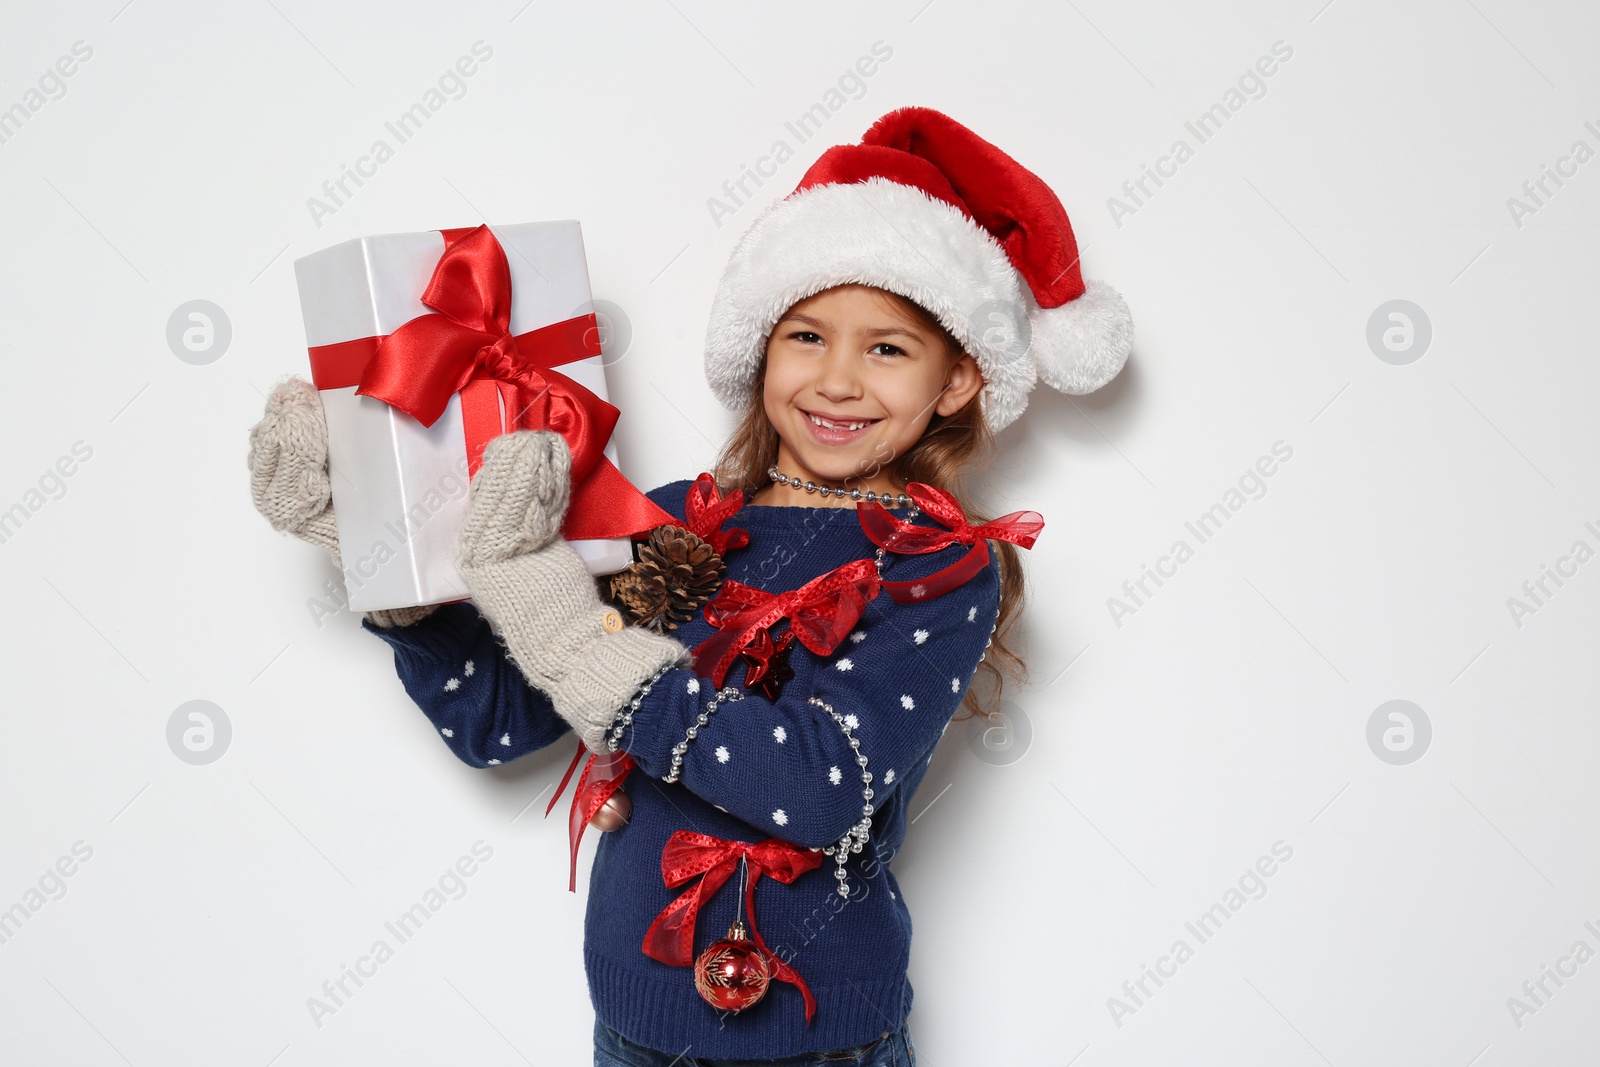 Photo of Cute little girl in handmade Christmas sweater and hat holding gift on white background